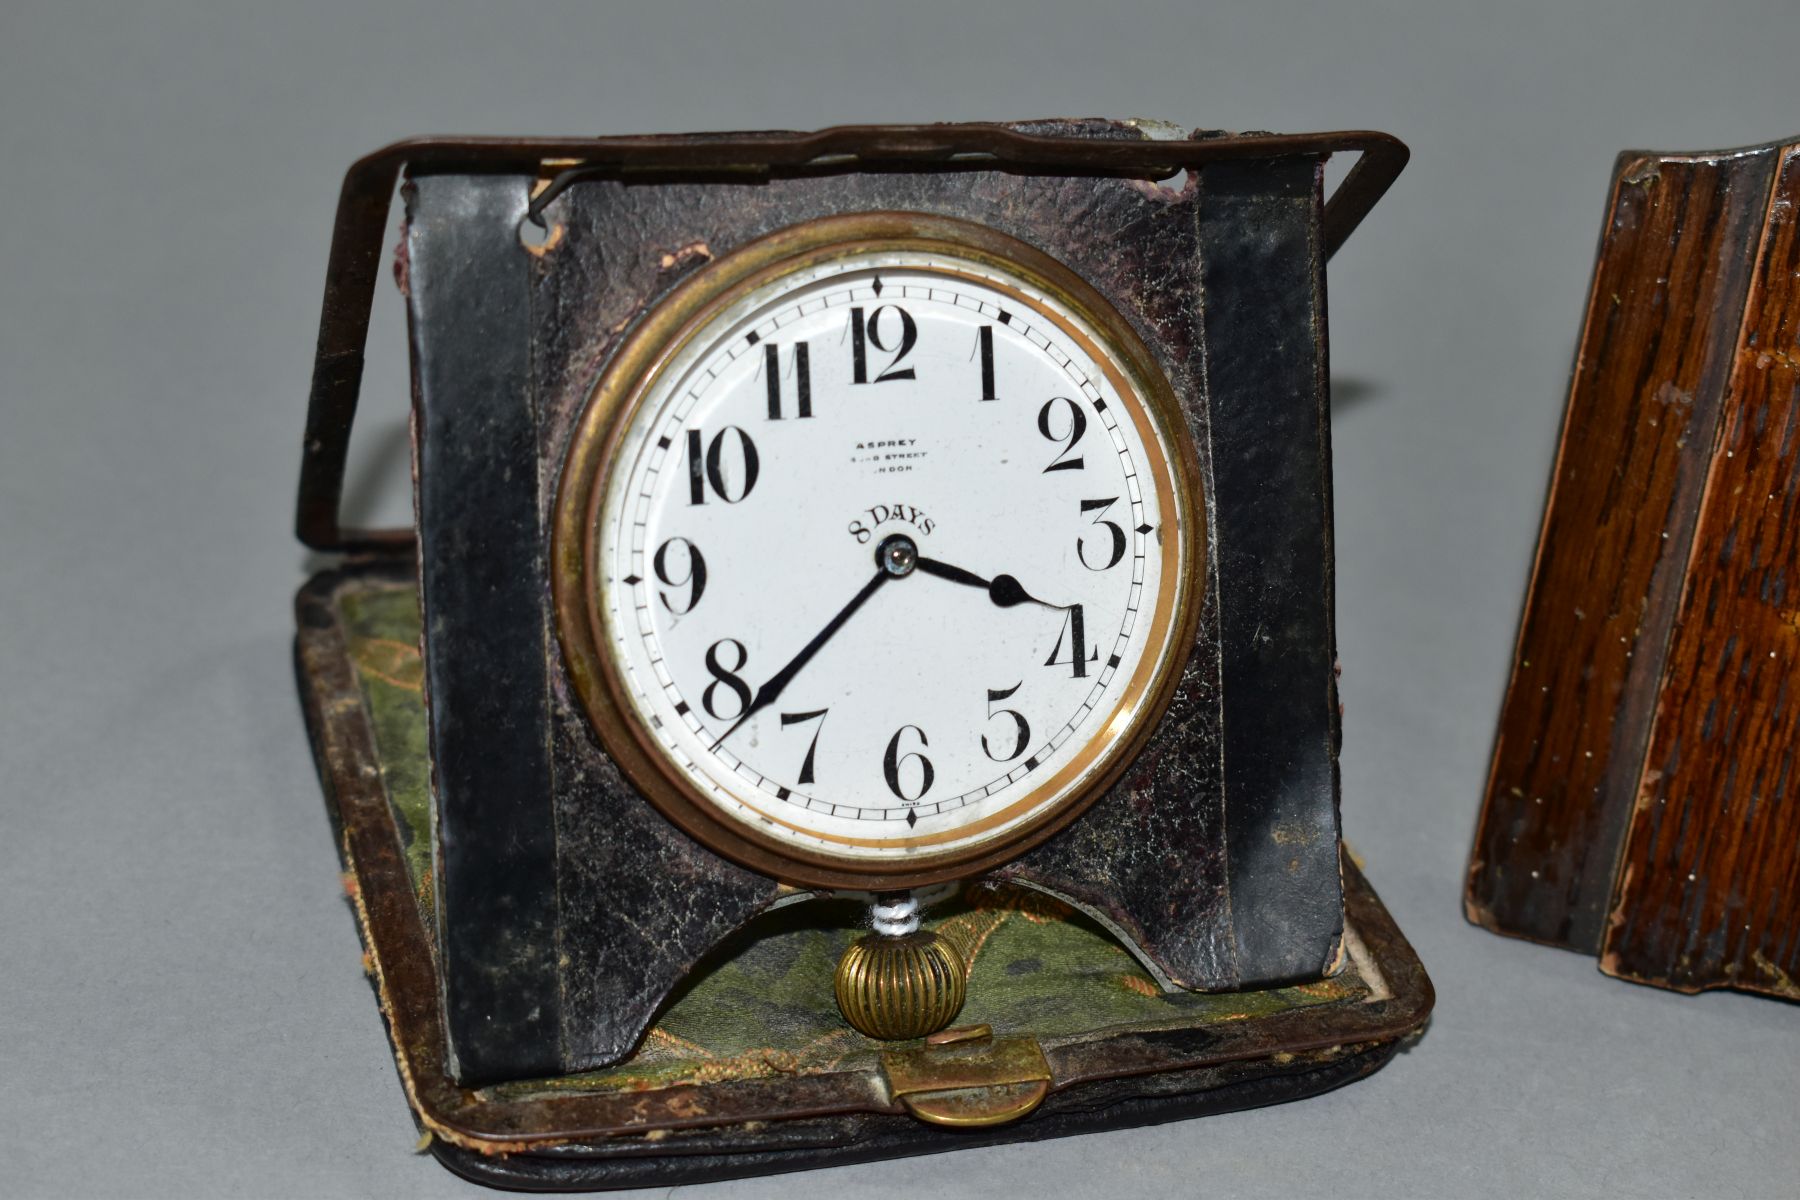 AN EARLY 20TH CENTURY ASPREY 8 DAY TRAVEL CLOCK, in a damaged leather folding case, incomplete, - Image 3 of 5